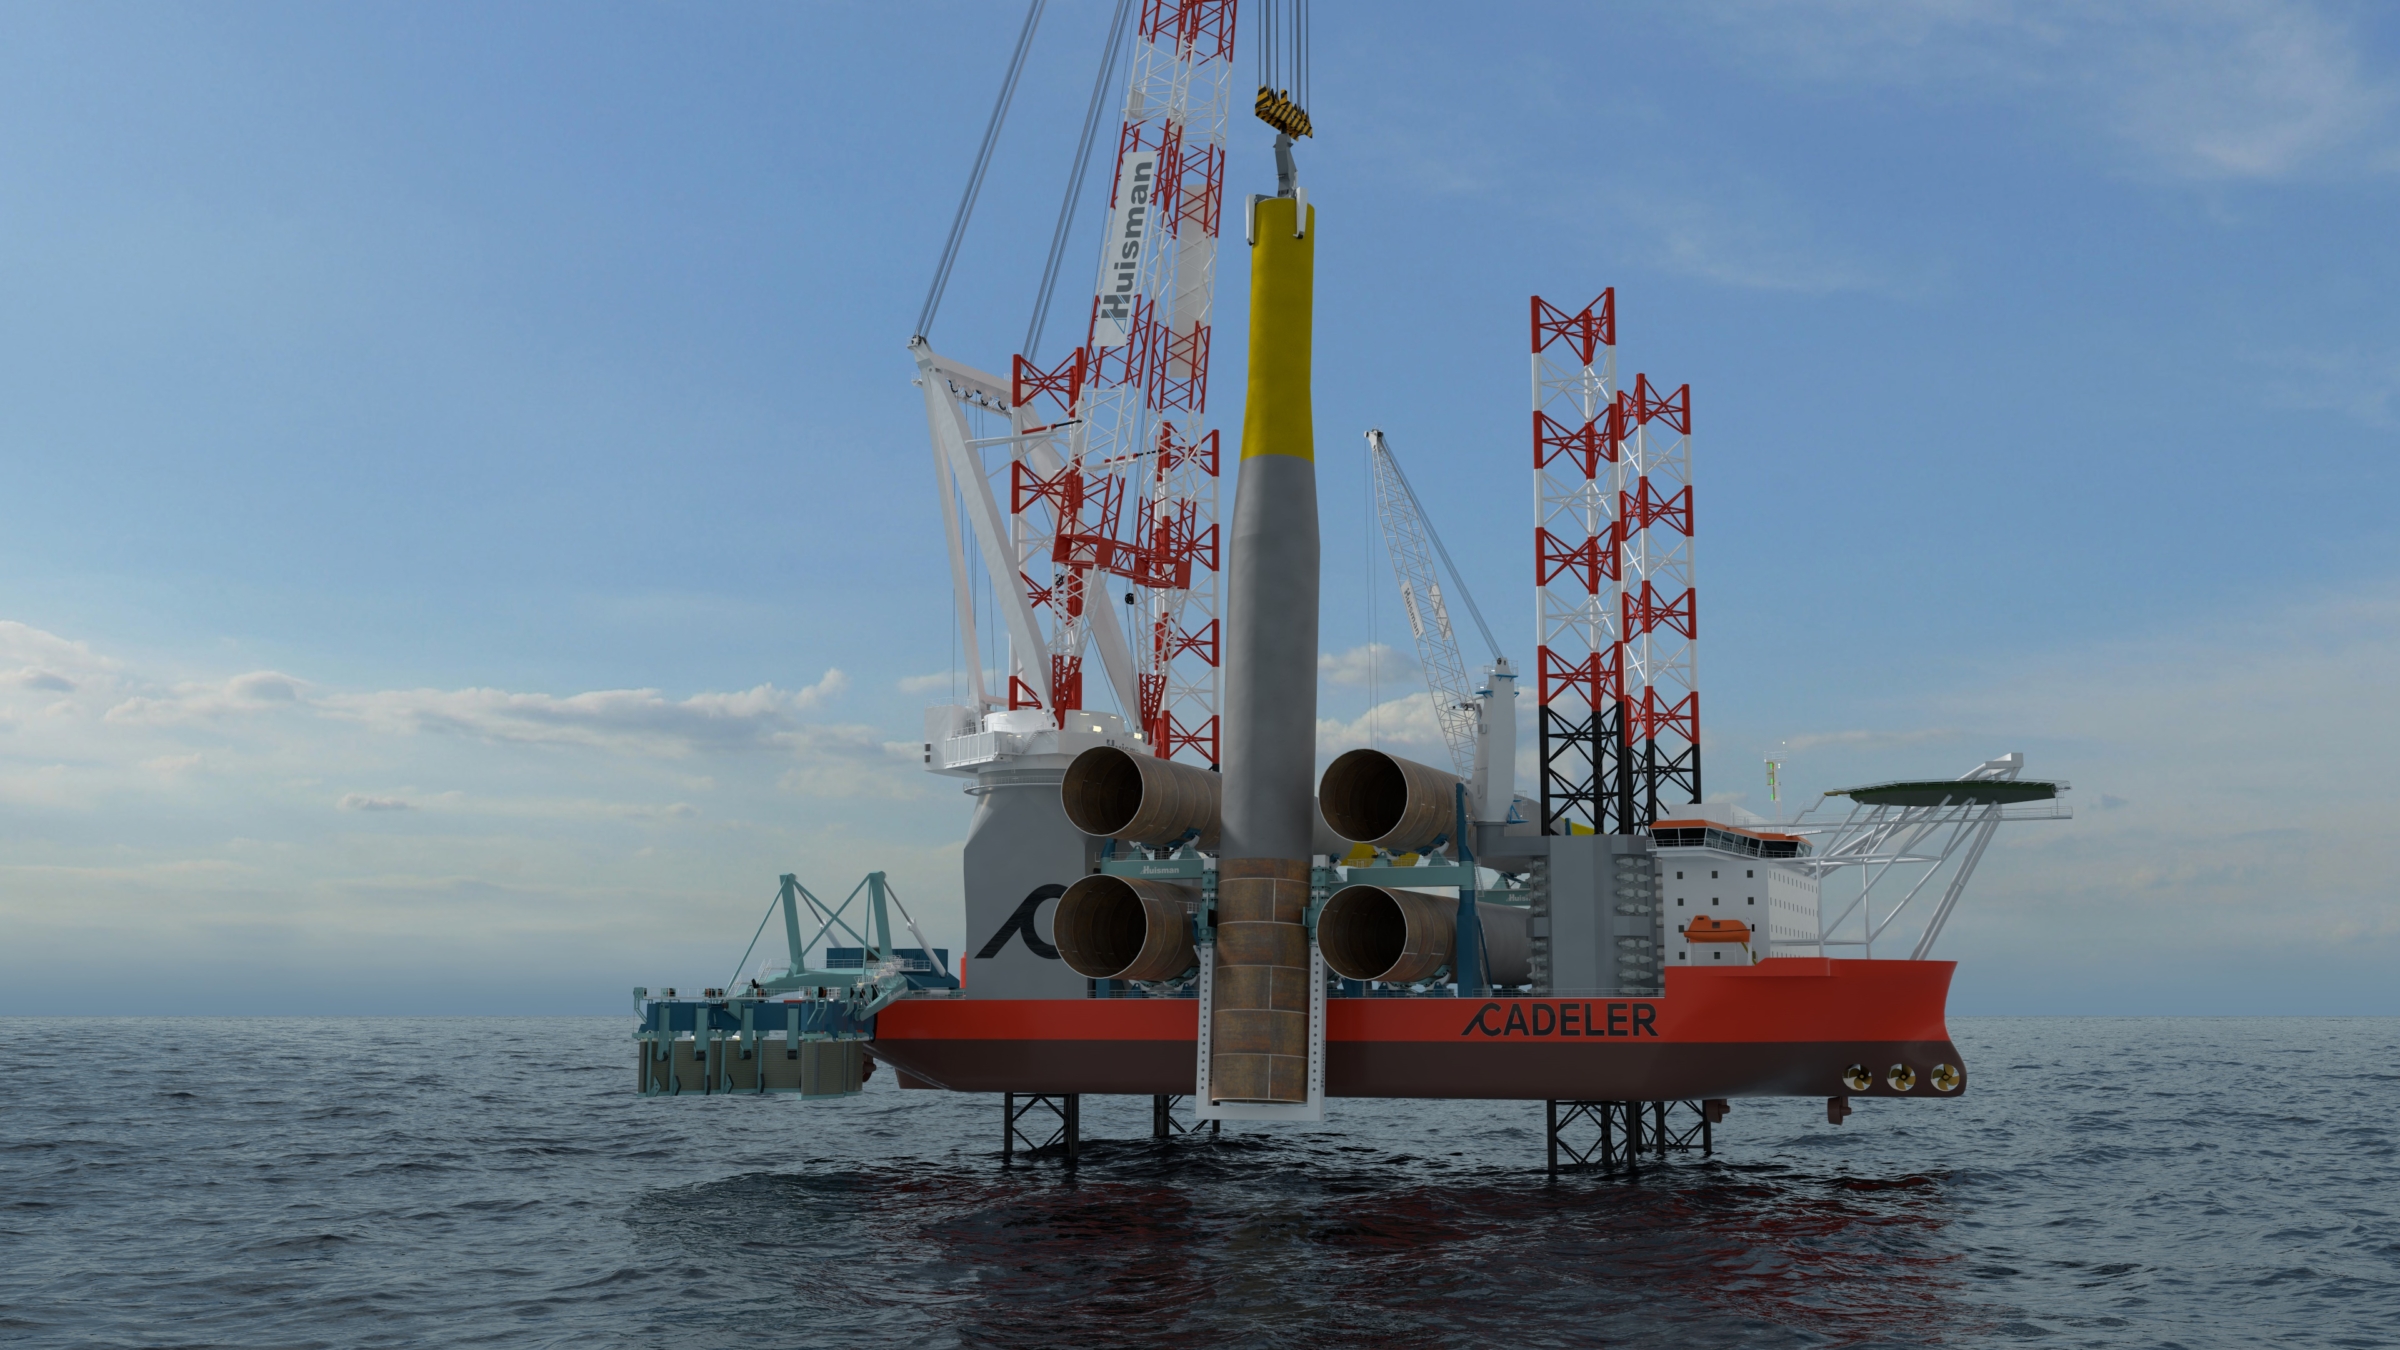 Huisman to deliver cranes and installation tools for Cadeler’s A-class